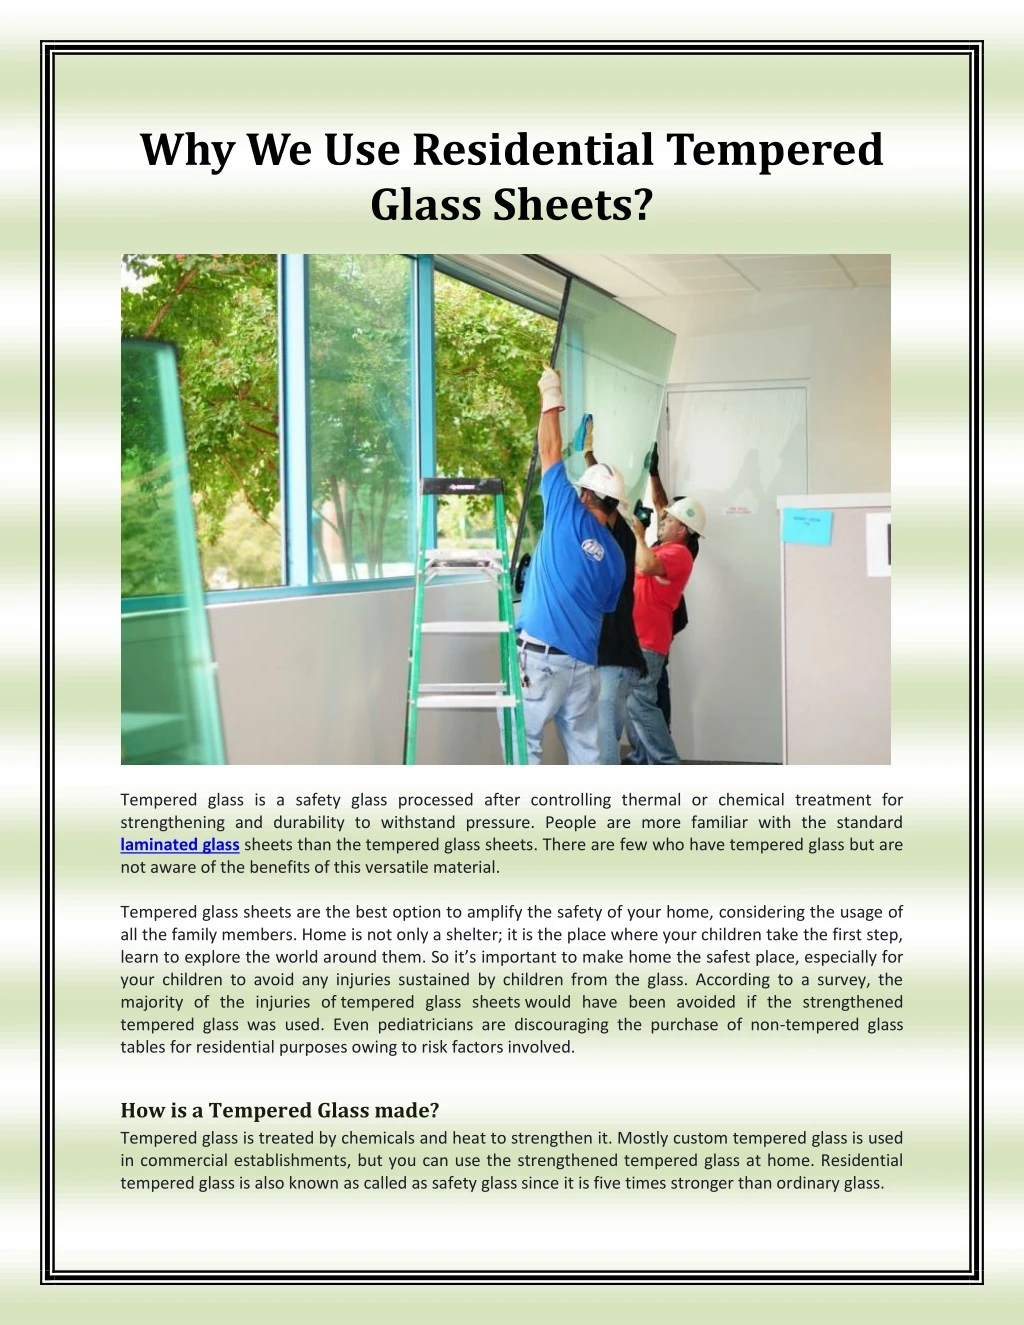 why we use residential tempered glass sheets